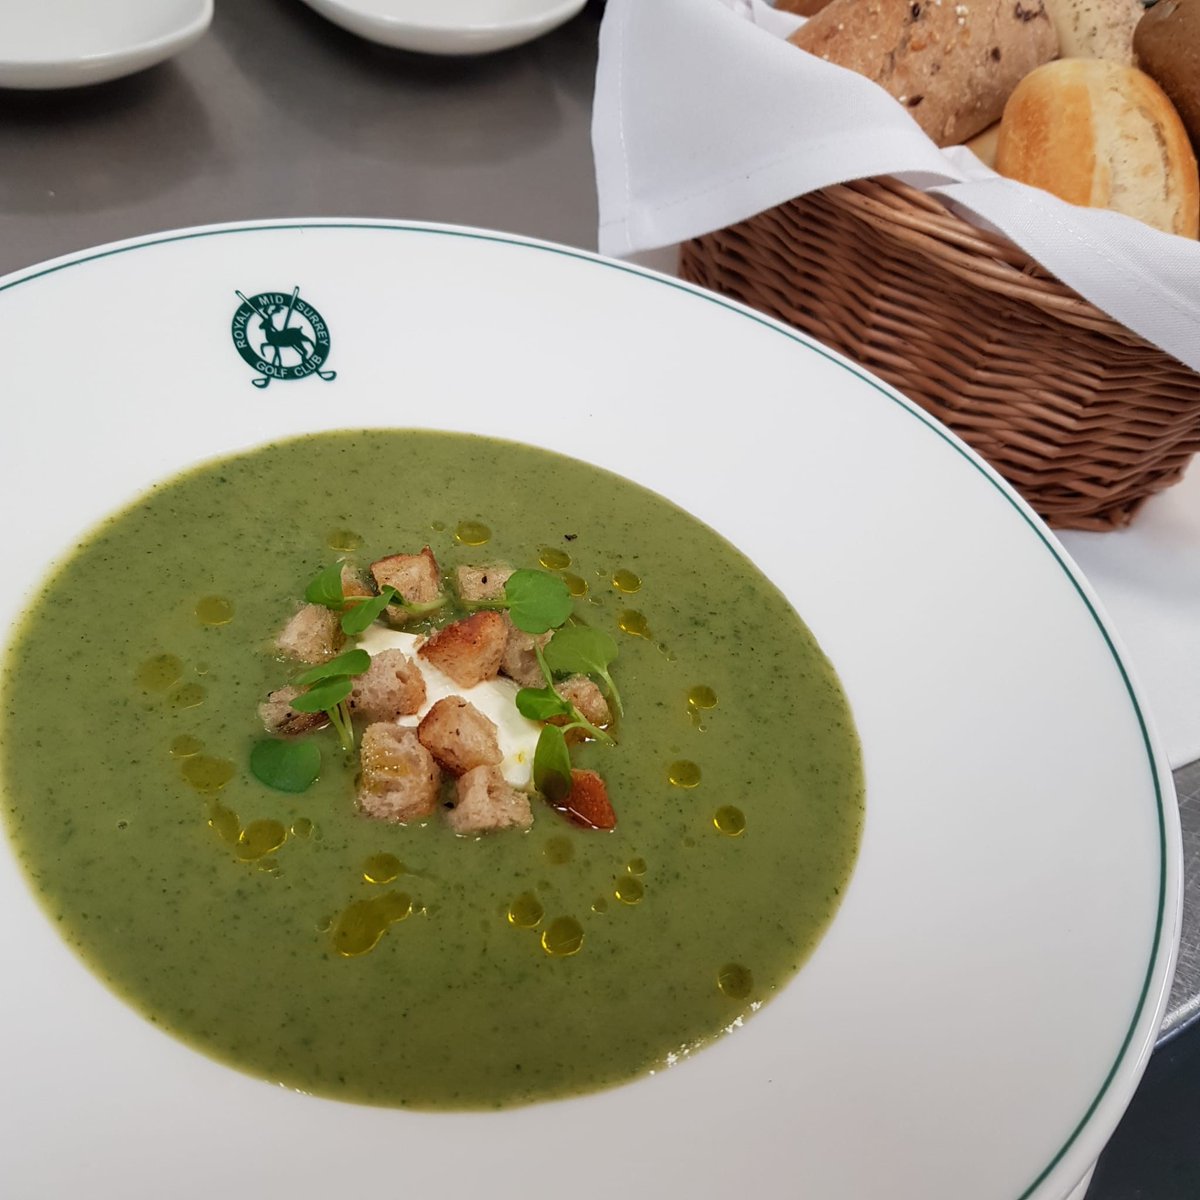 🌿 Today's menu highlight - Nettle Soup! Embracing sustainability with this nutritious and delicious dish, made from nettles foraged from the course.  It's a win-win for taste buds & the planet! #SustainableEating #NettleSoup #EcoFriendlyDining #greenergolf🌱